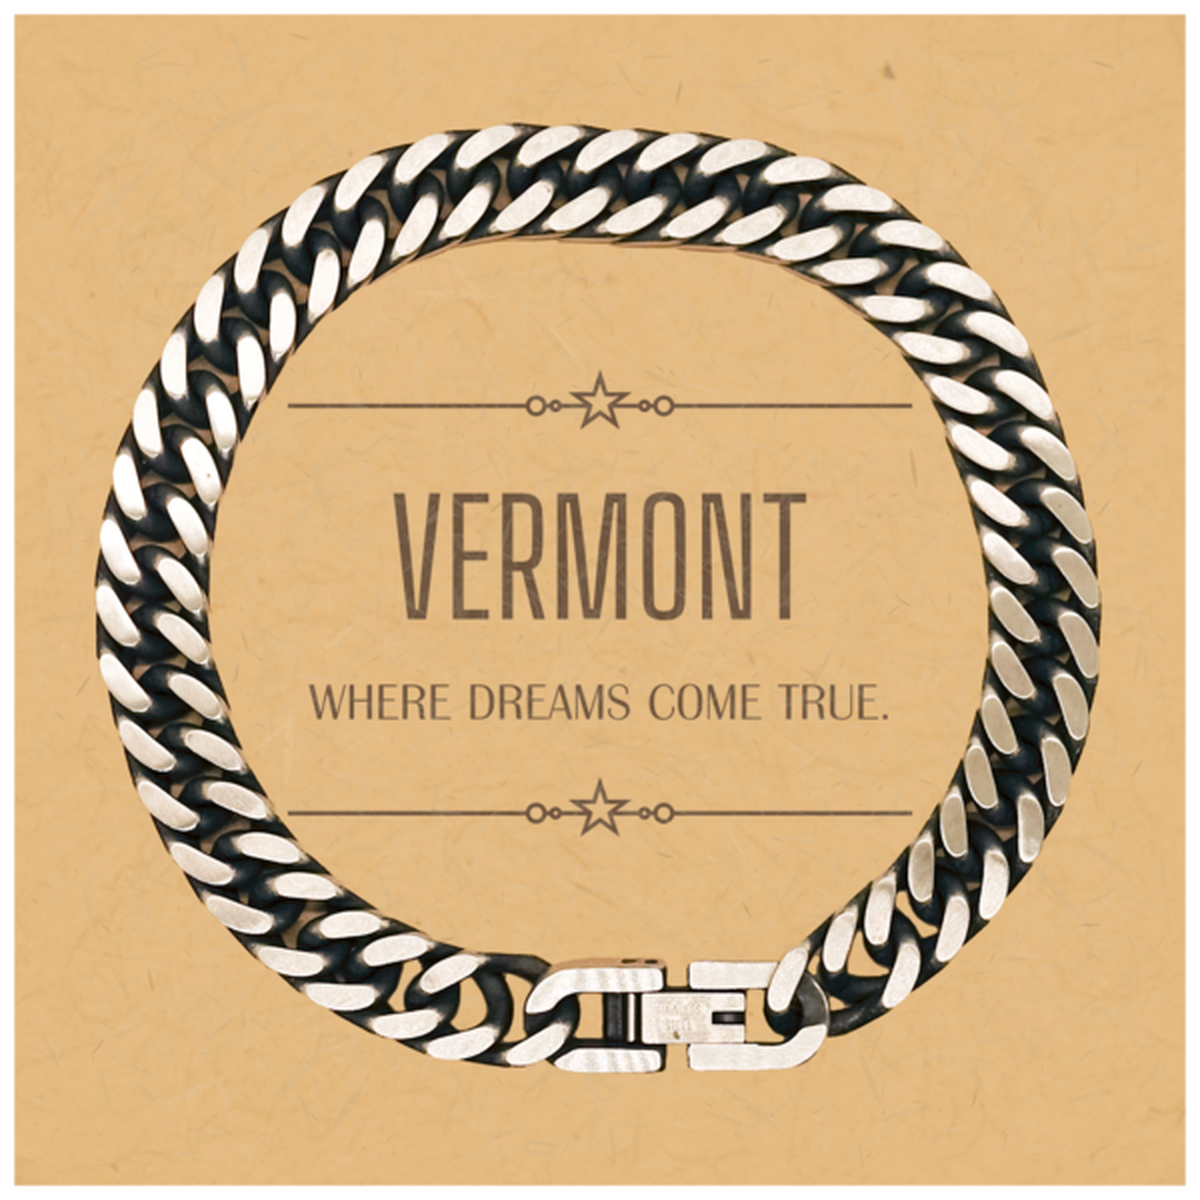 Love Vermont State Cuban Link Chain Bracelet, Vermont Where dreams come true, Birthday Christmas Inspirational Gifts For Vermont Men, Women, Friends